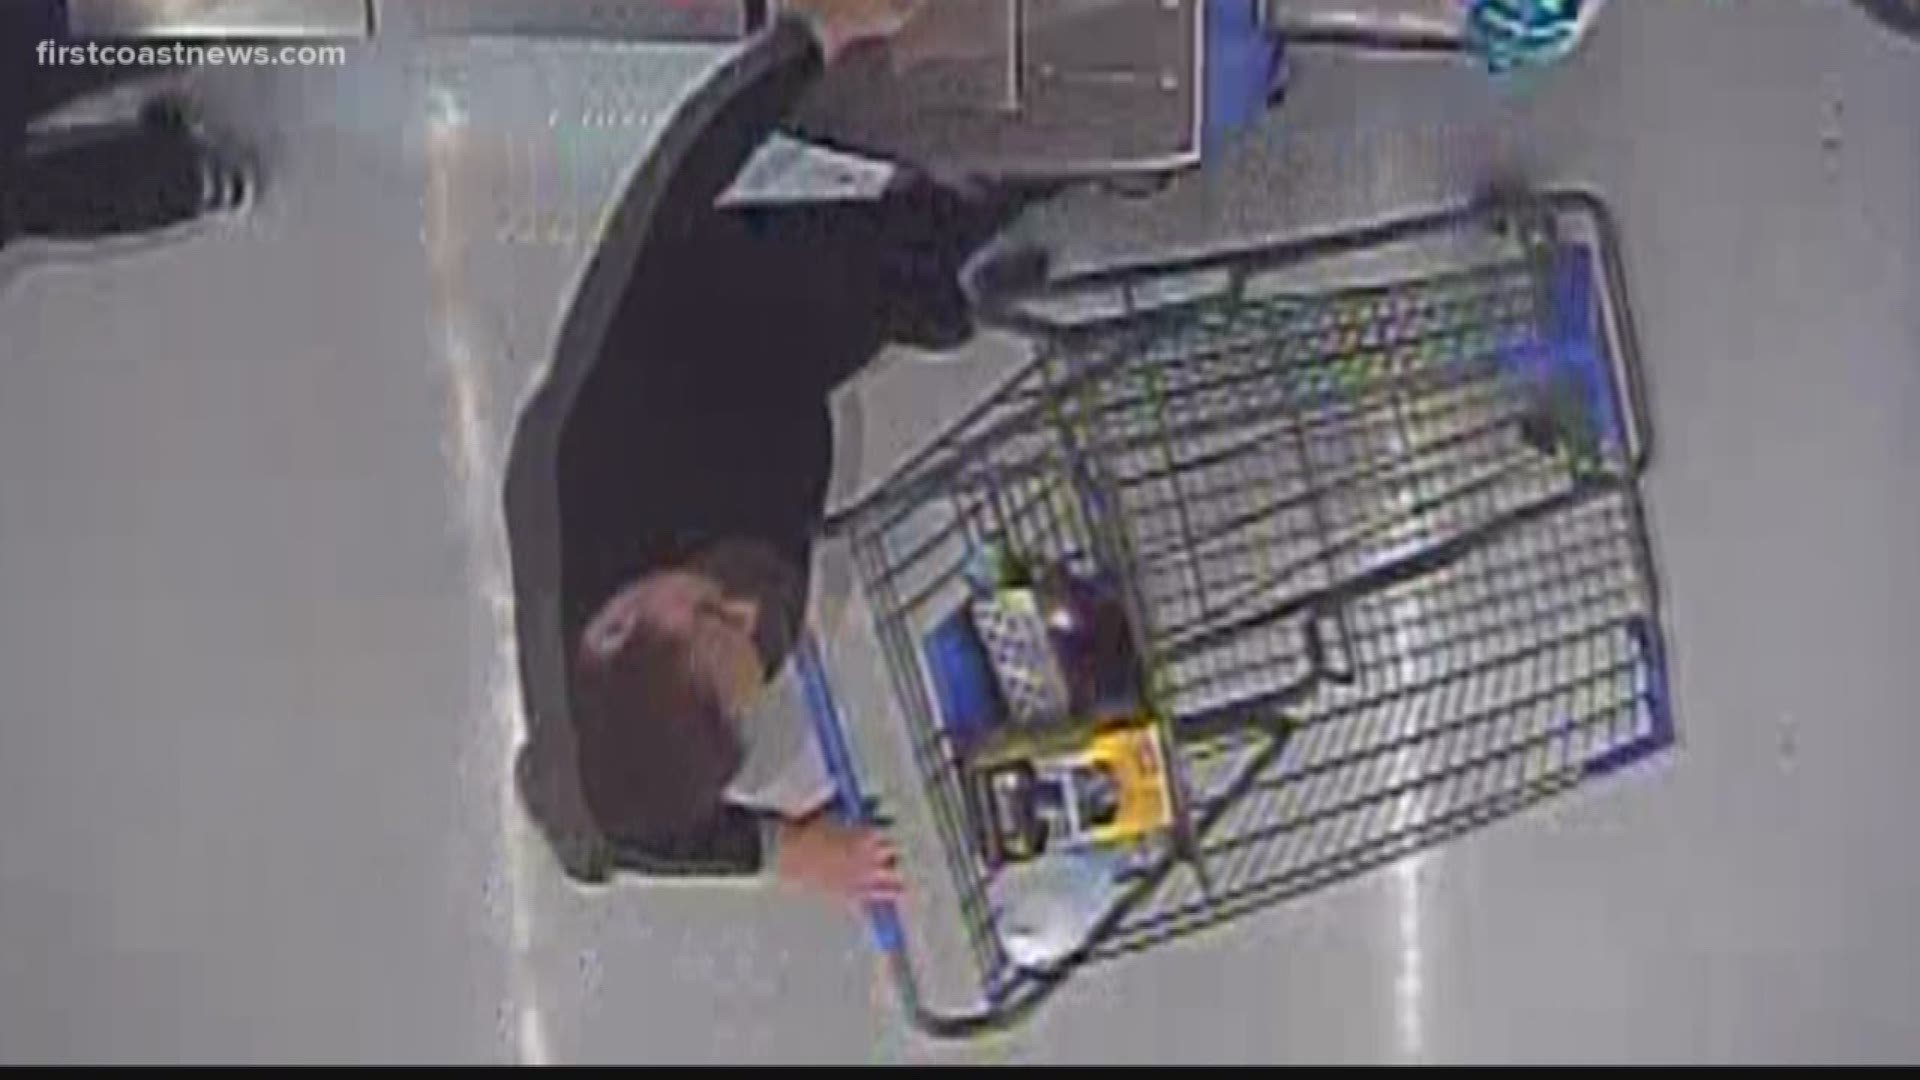 Newly released surveillance footage shows Kessler purchasing ammonia, black trash bags, and an electric knife at a Walmart self-checkout line.